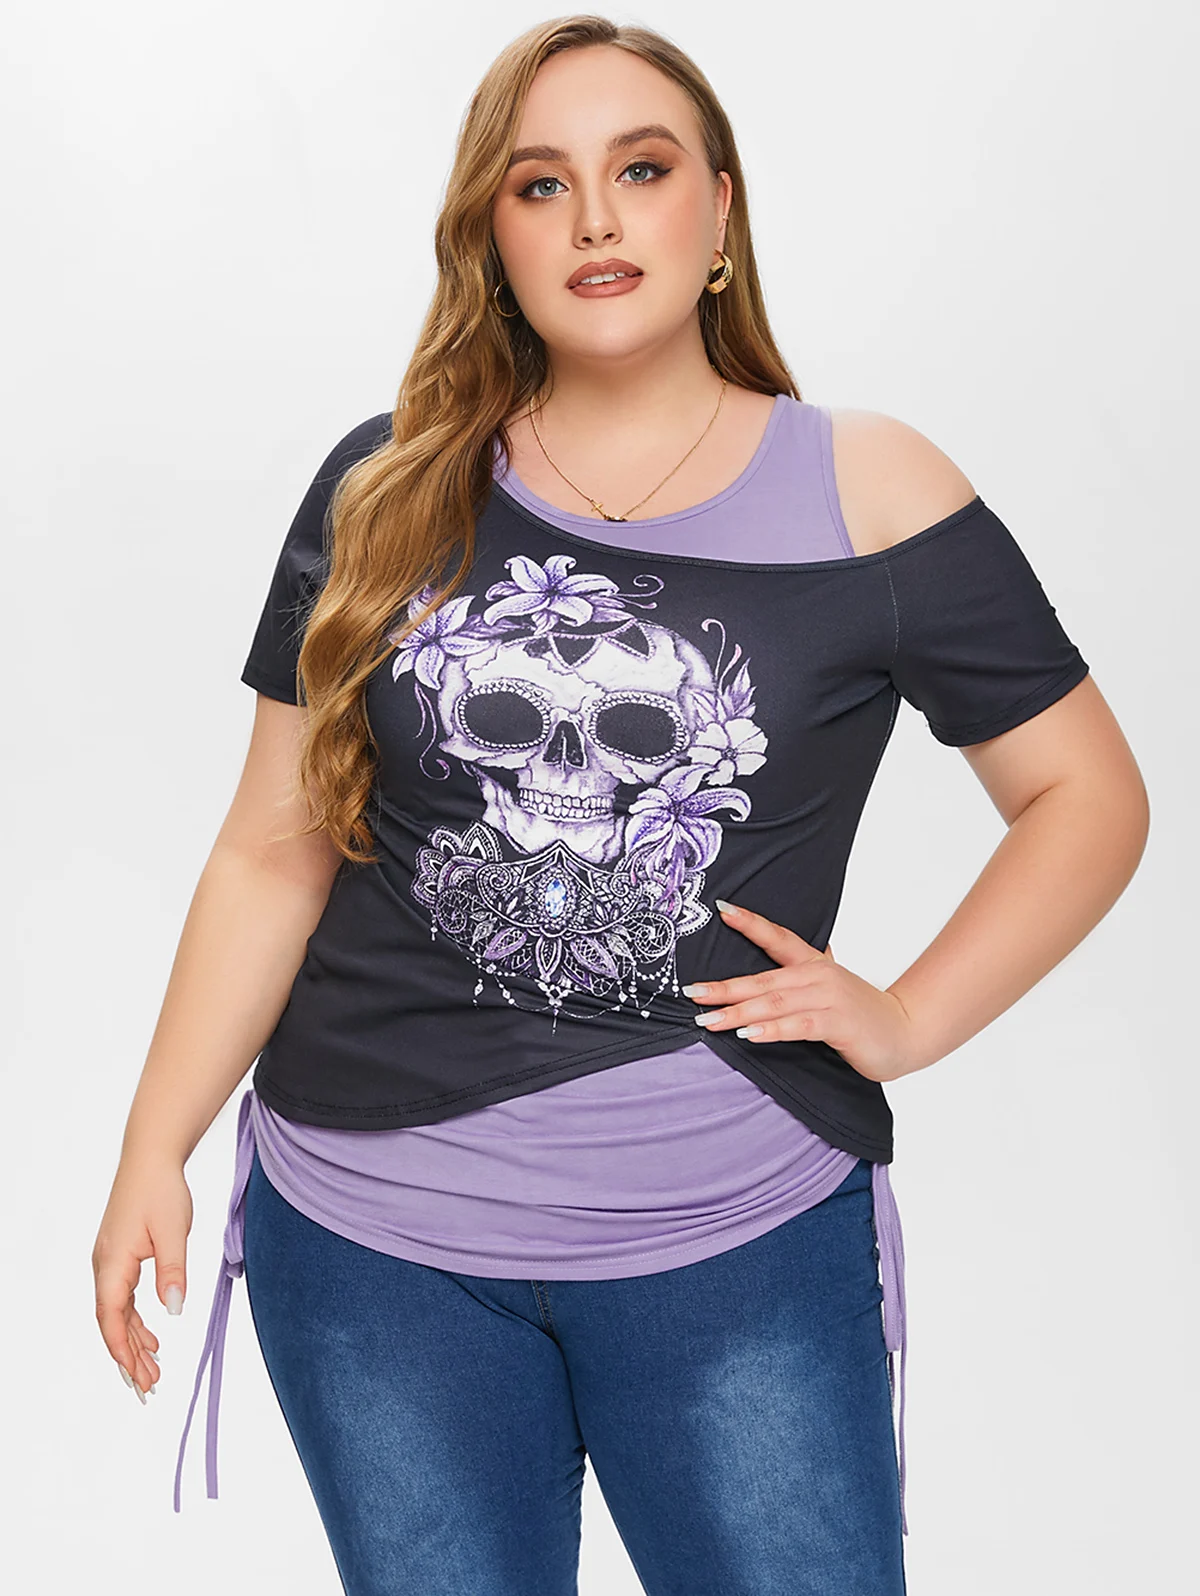 

Women's Skew Neck Skull Lace Gothic Tee and Ruched Blouson Tank Top Set Or Light Blue Contrast Lace Panel Cutout T-Shirts 4XL